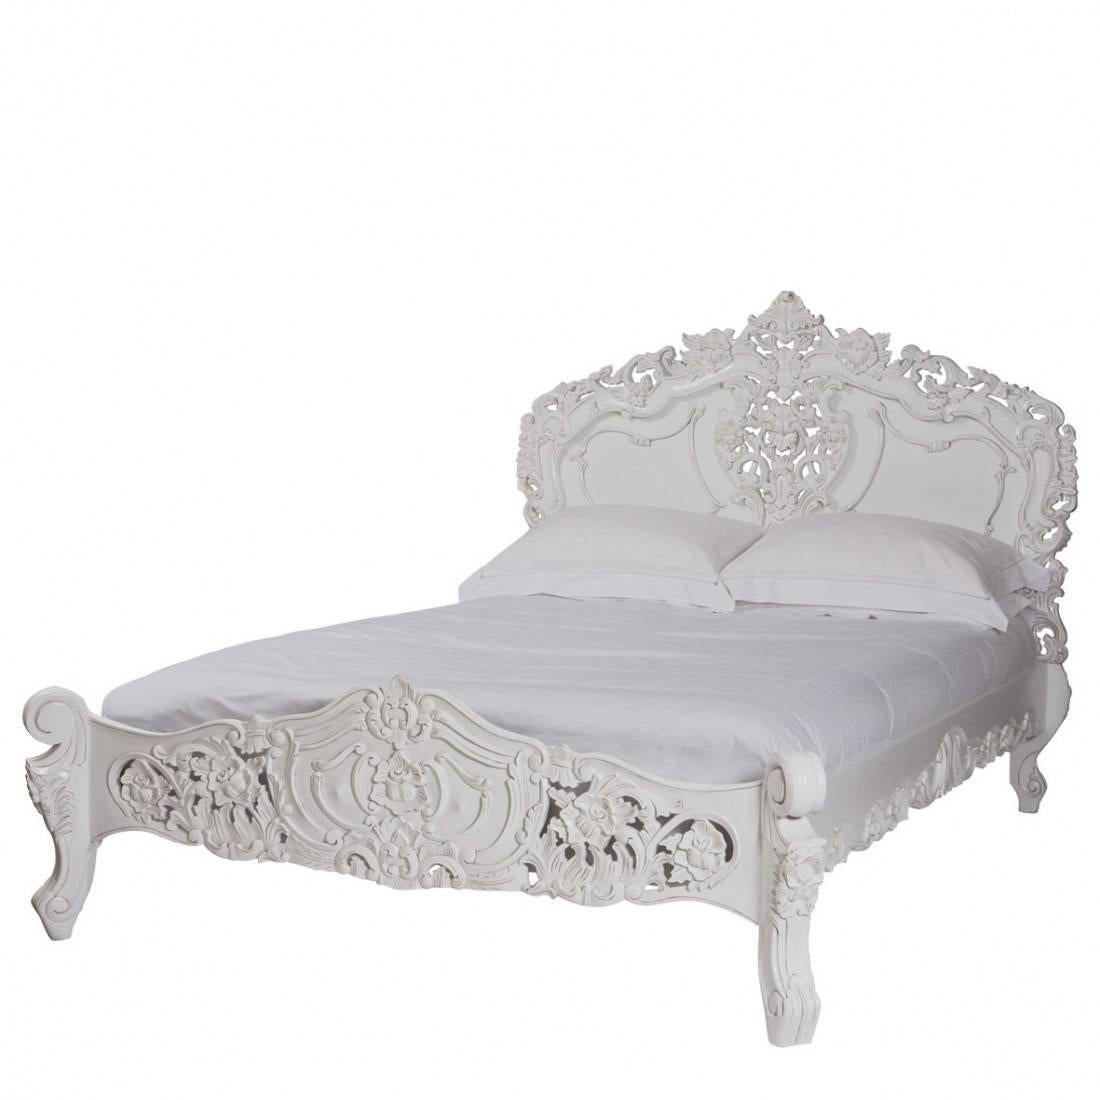 Hand carved beautiful bed in the French Louis XV Rococo Style. Solid mahogany wood. Finished in glossy white with scrumptious carvings. Will fit a standard US Queen size Mattress. Bed comes with slats to place a mattress on top. Please contact us